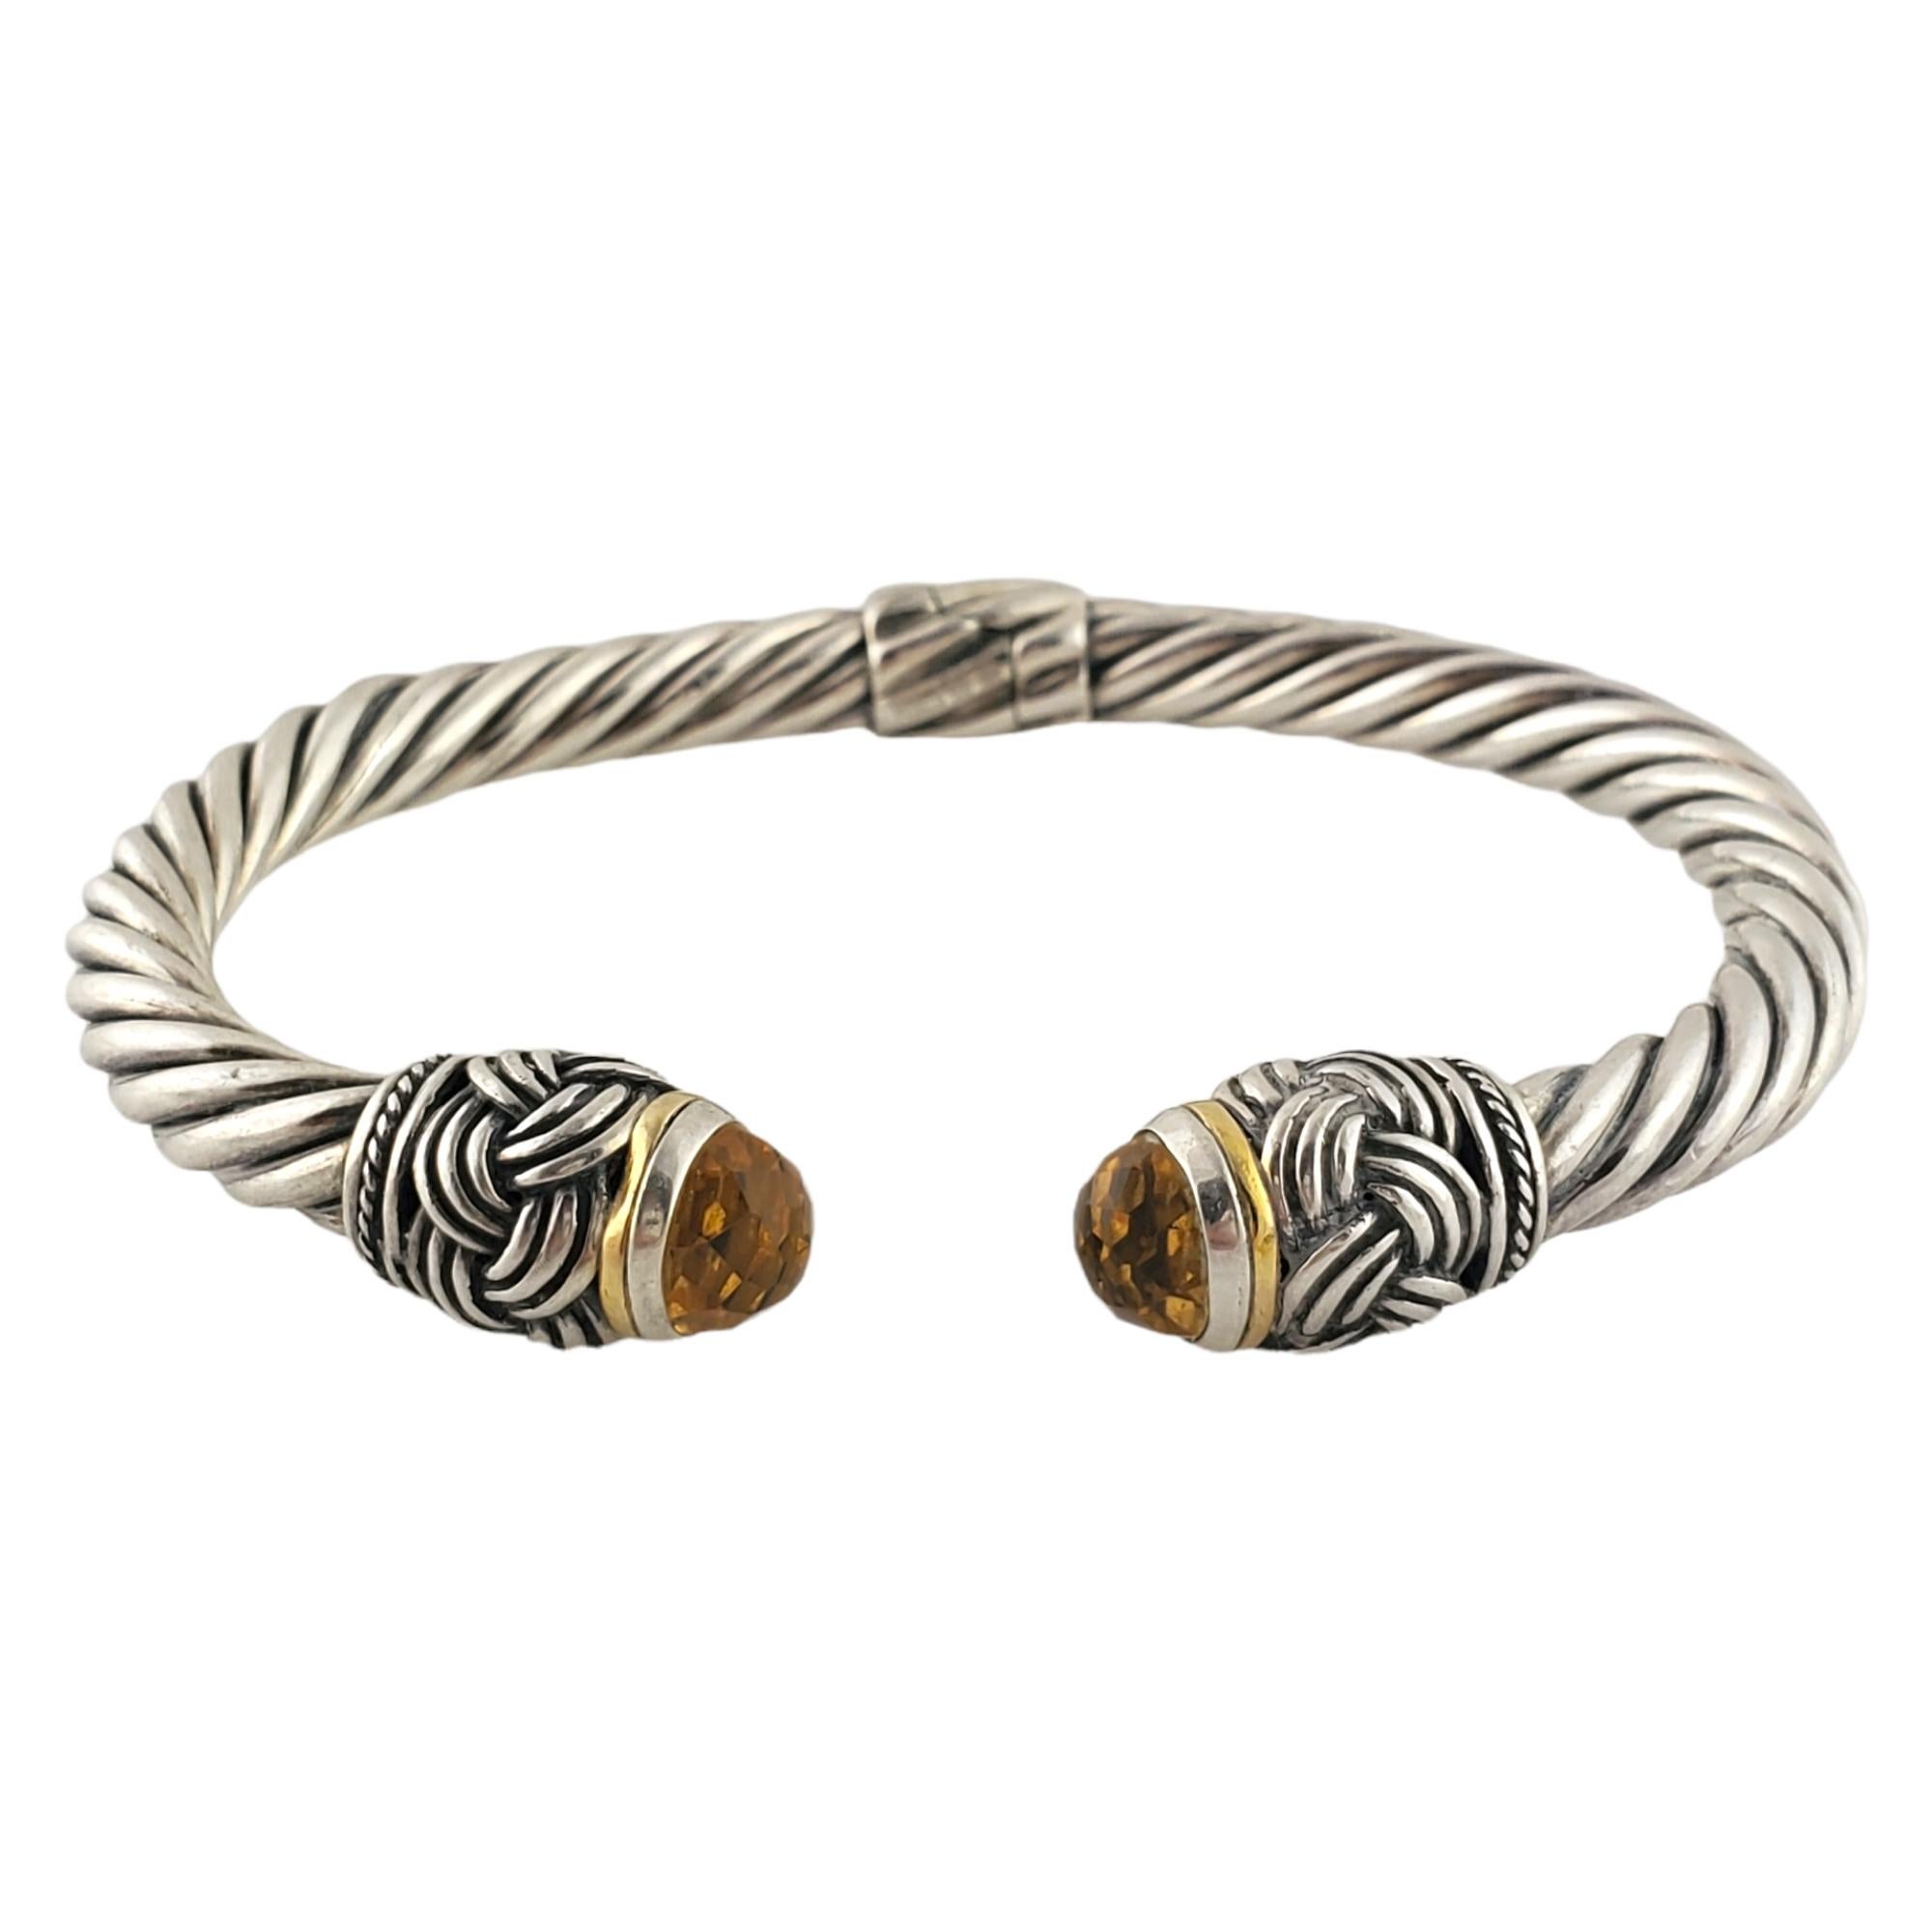 Sterling silver, 18K yellow gold plated and citrine hinged cuff bracelet by designer EFFY.

Classic cable design design cuff with faceted citrine stones on each end surrounded by 18K yellow gold bezel and silver braid detail. Hinged at